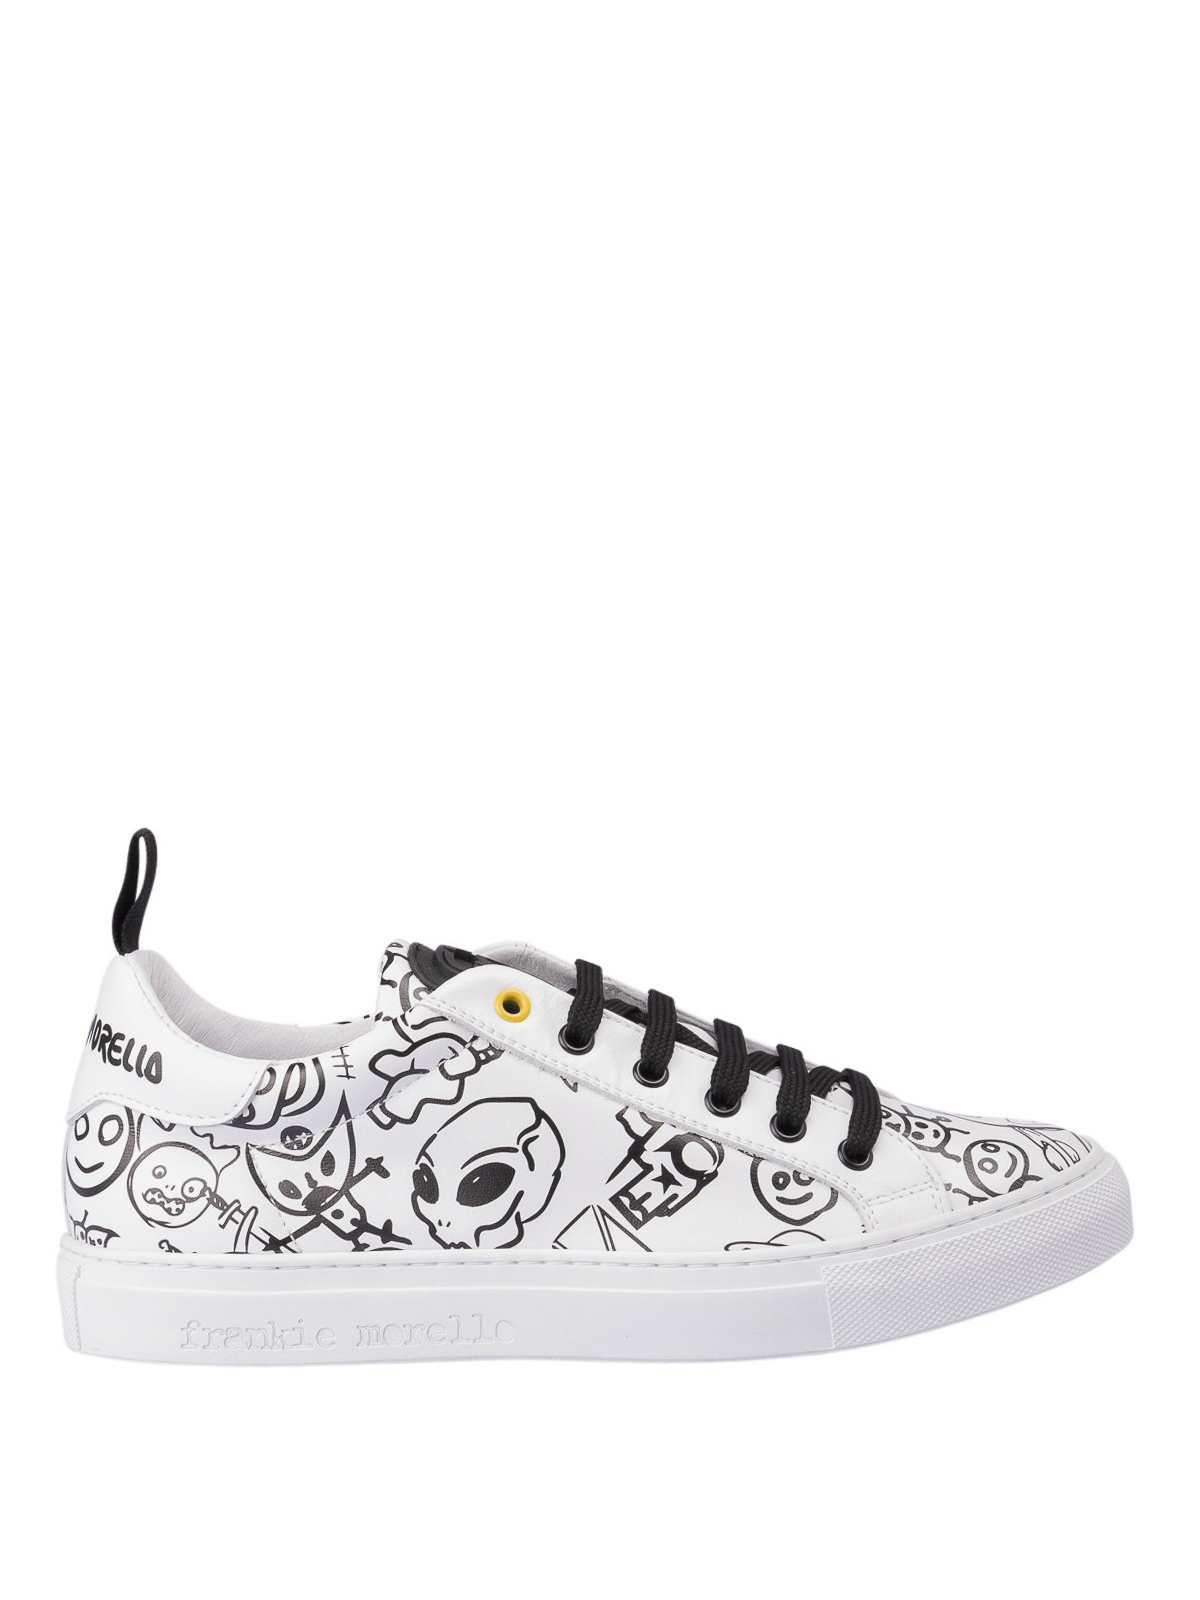 Tientallen Afrika Voor type Trainers Frankie Morello - Printed white leather sneakers - 7216A